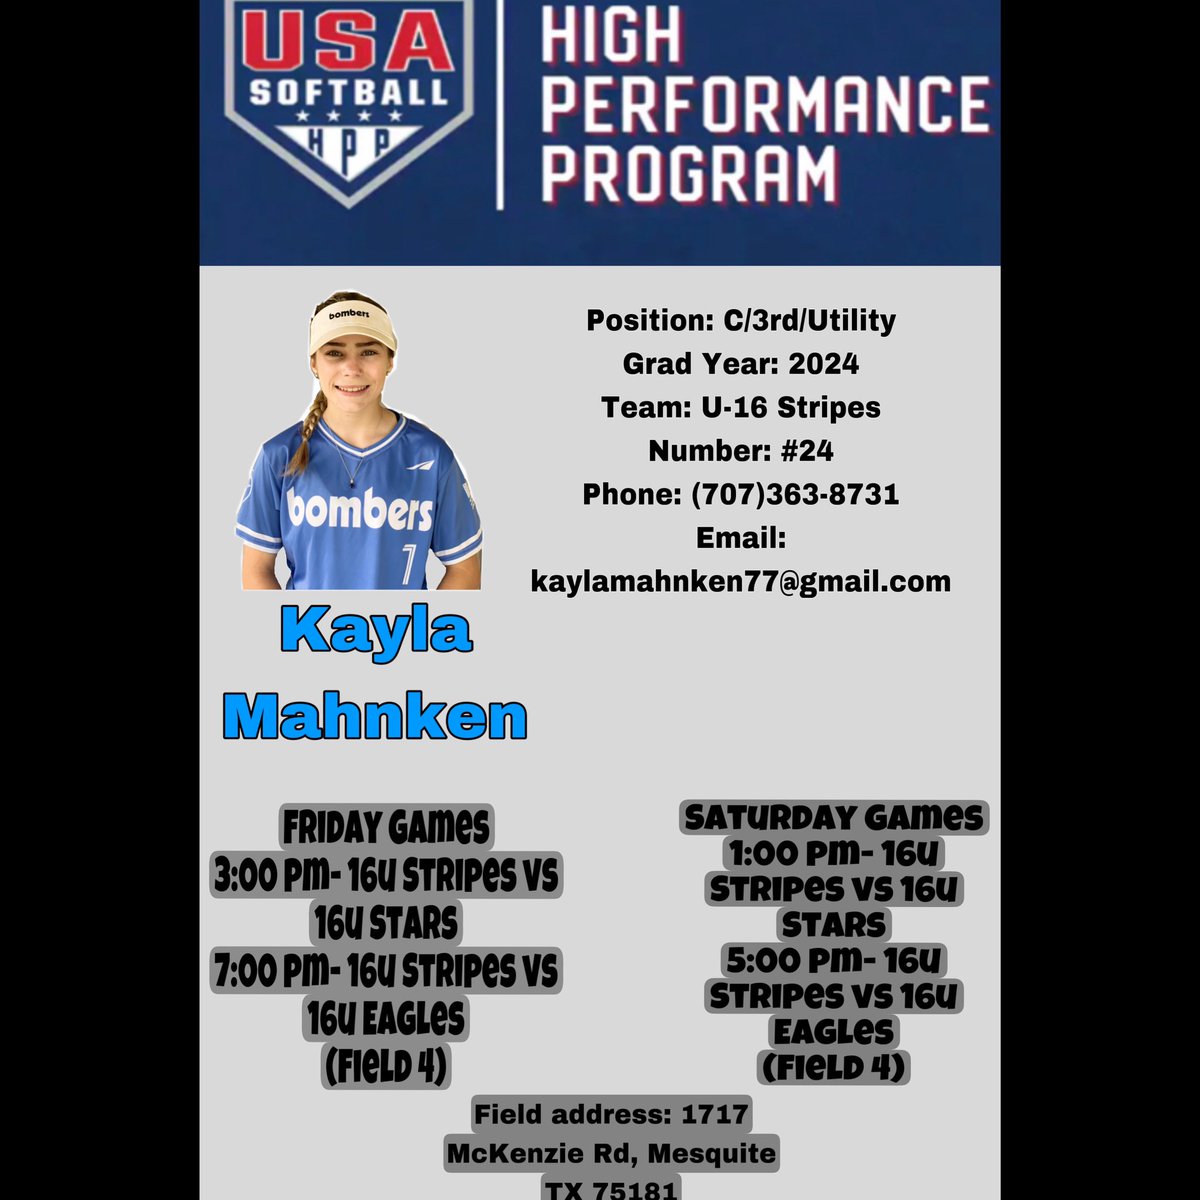 I am honored to say I will be representing the U-16 Stripes Team this weekend for my second HPP Team USA National Selection Event in Mesquite, Texas. I am so excited!!💙❤️@LegacyLegendsS1 @SBRRetweets @Los_Stuff @westcoastpreps_ @RRecruiting_